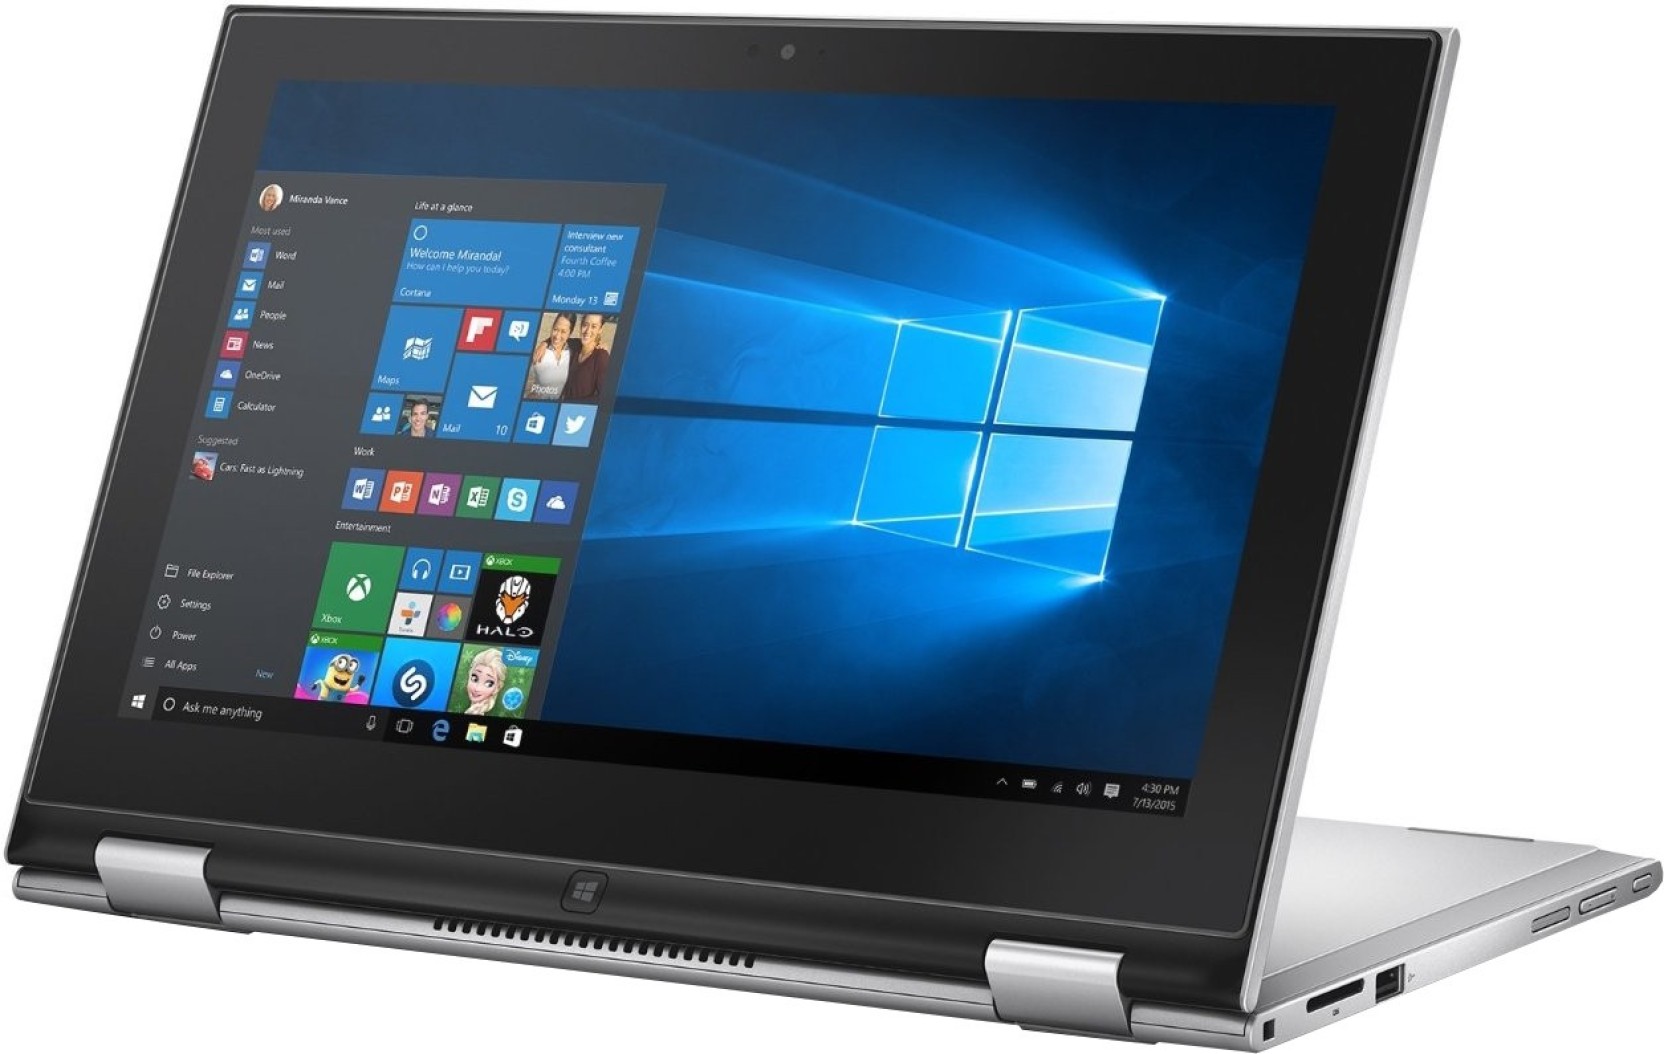 Dell Inspiron Core i3 6th Gen (4 GB/500 GB HDD/Windows 10 Home) 3158 2 in 1 Laptop Rs.43490